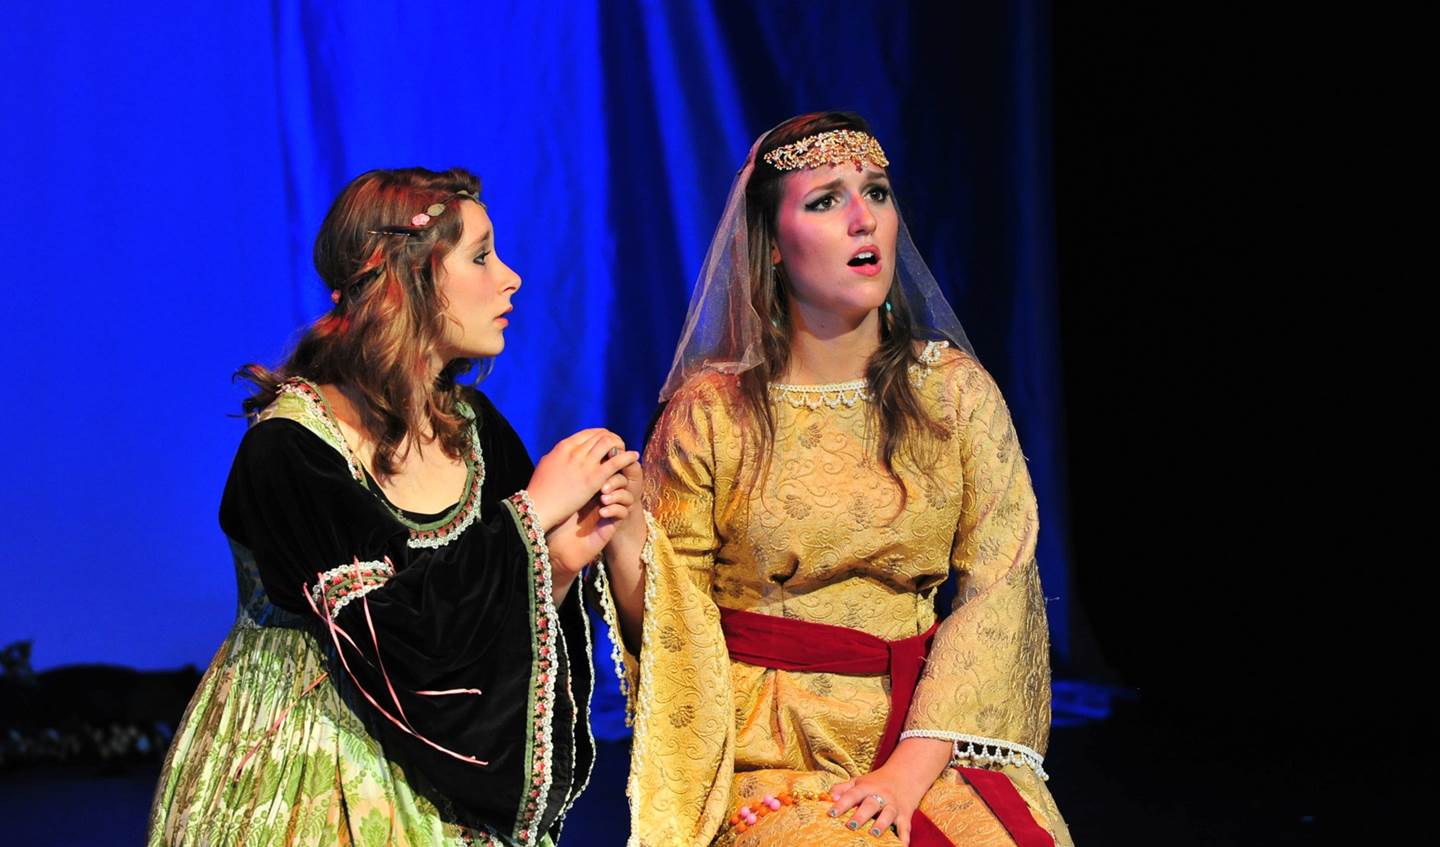 Two girls kneeling on stage. One has a distressed look on her face while the other one is holding her hand.